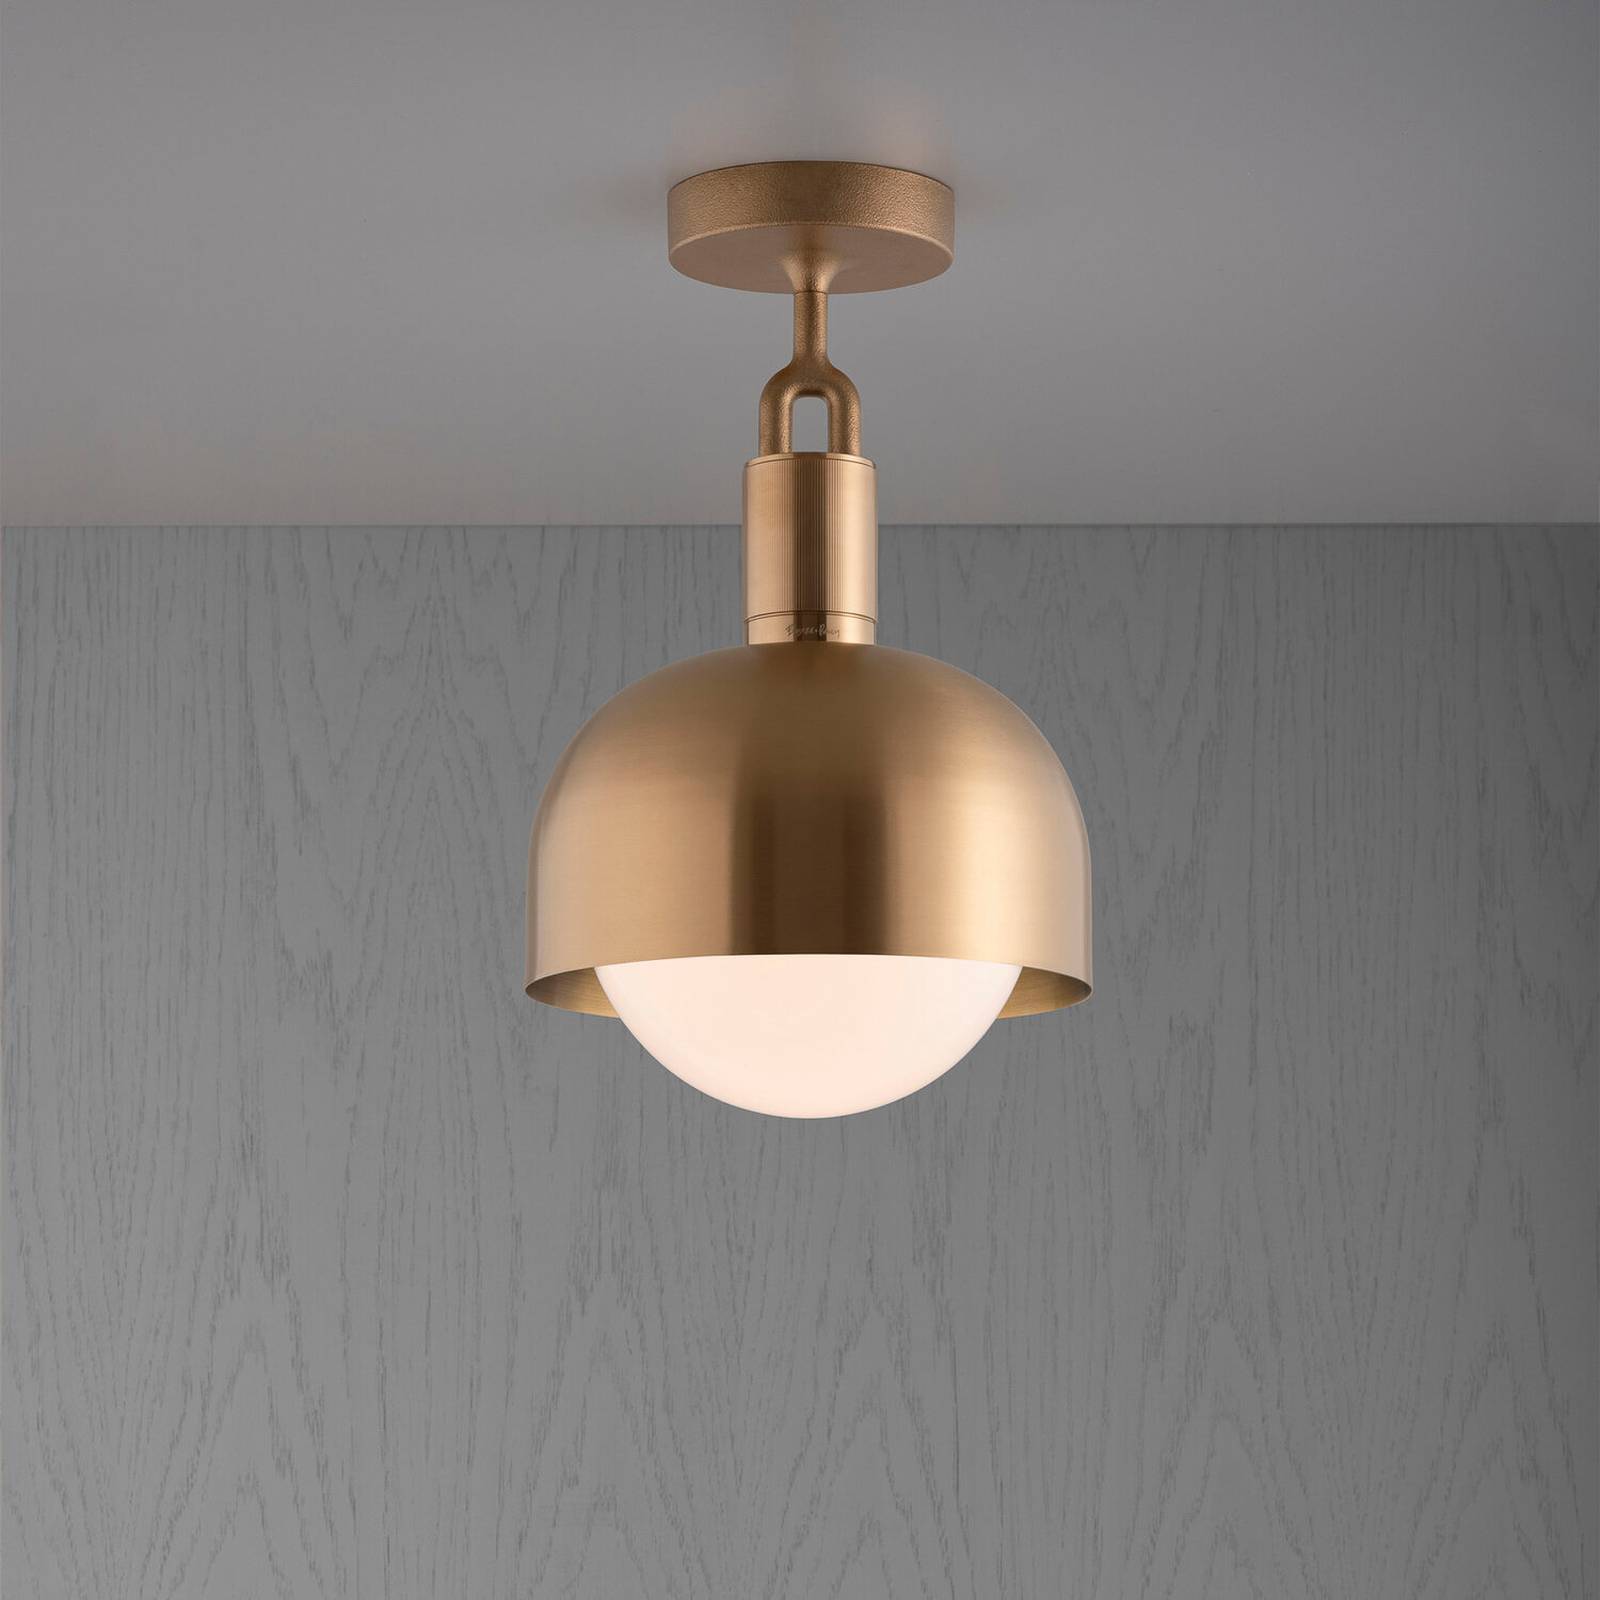 Image of Buster + Punch Forked plafond laiton/opale Ø 25cm 